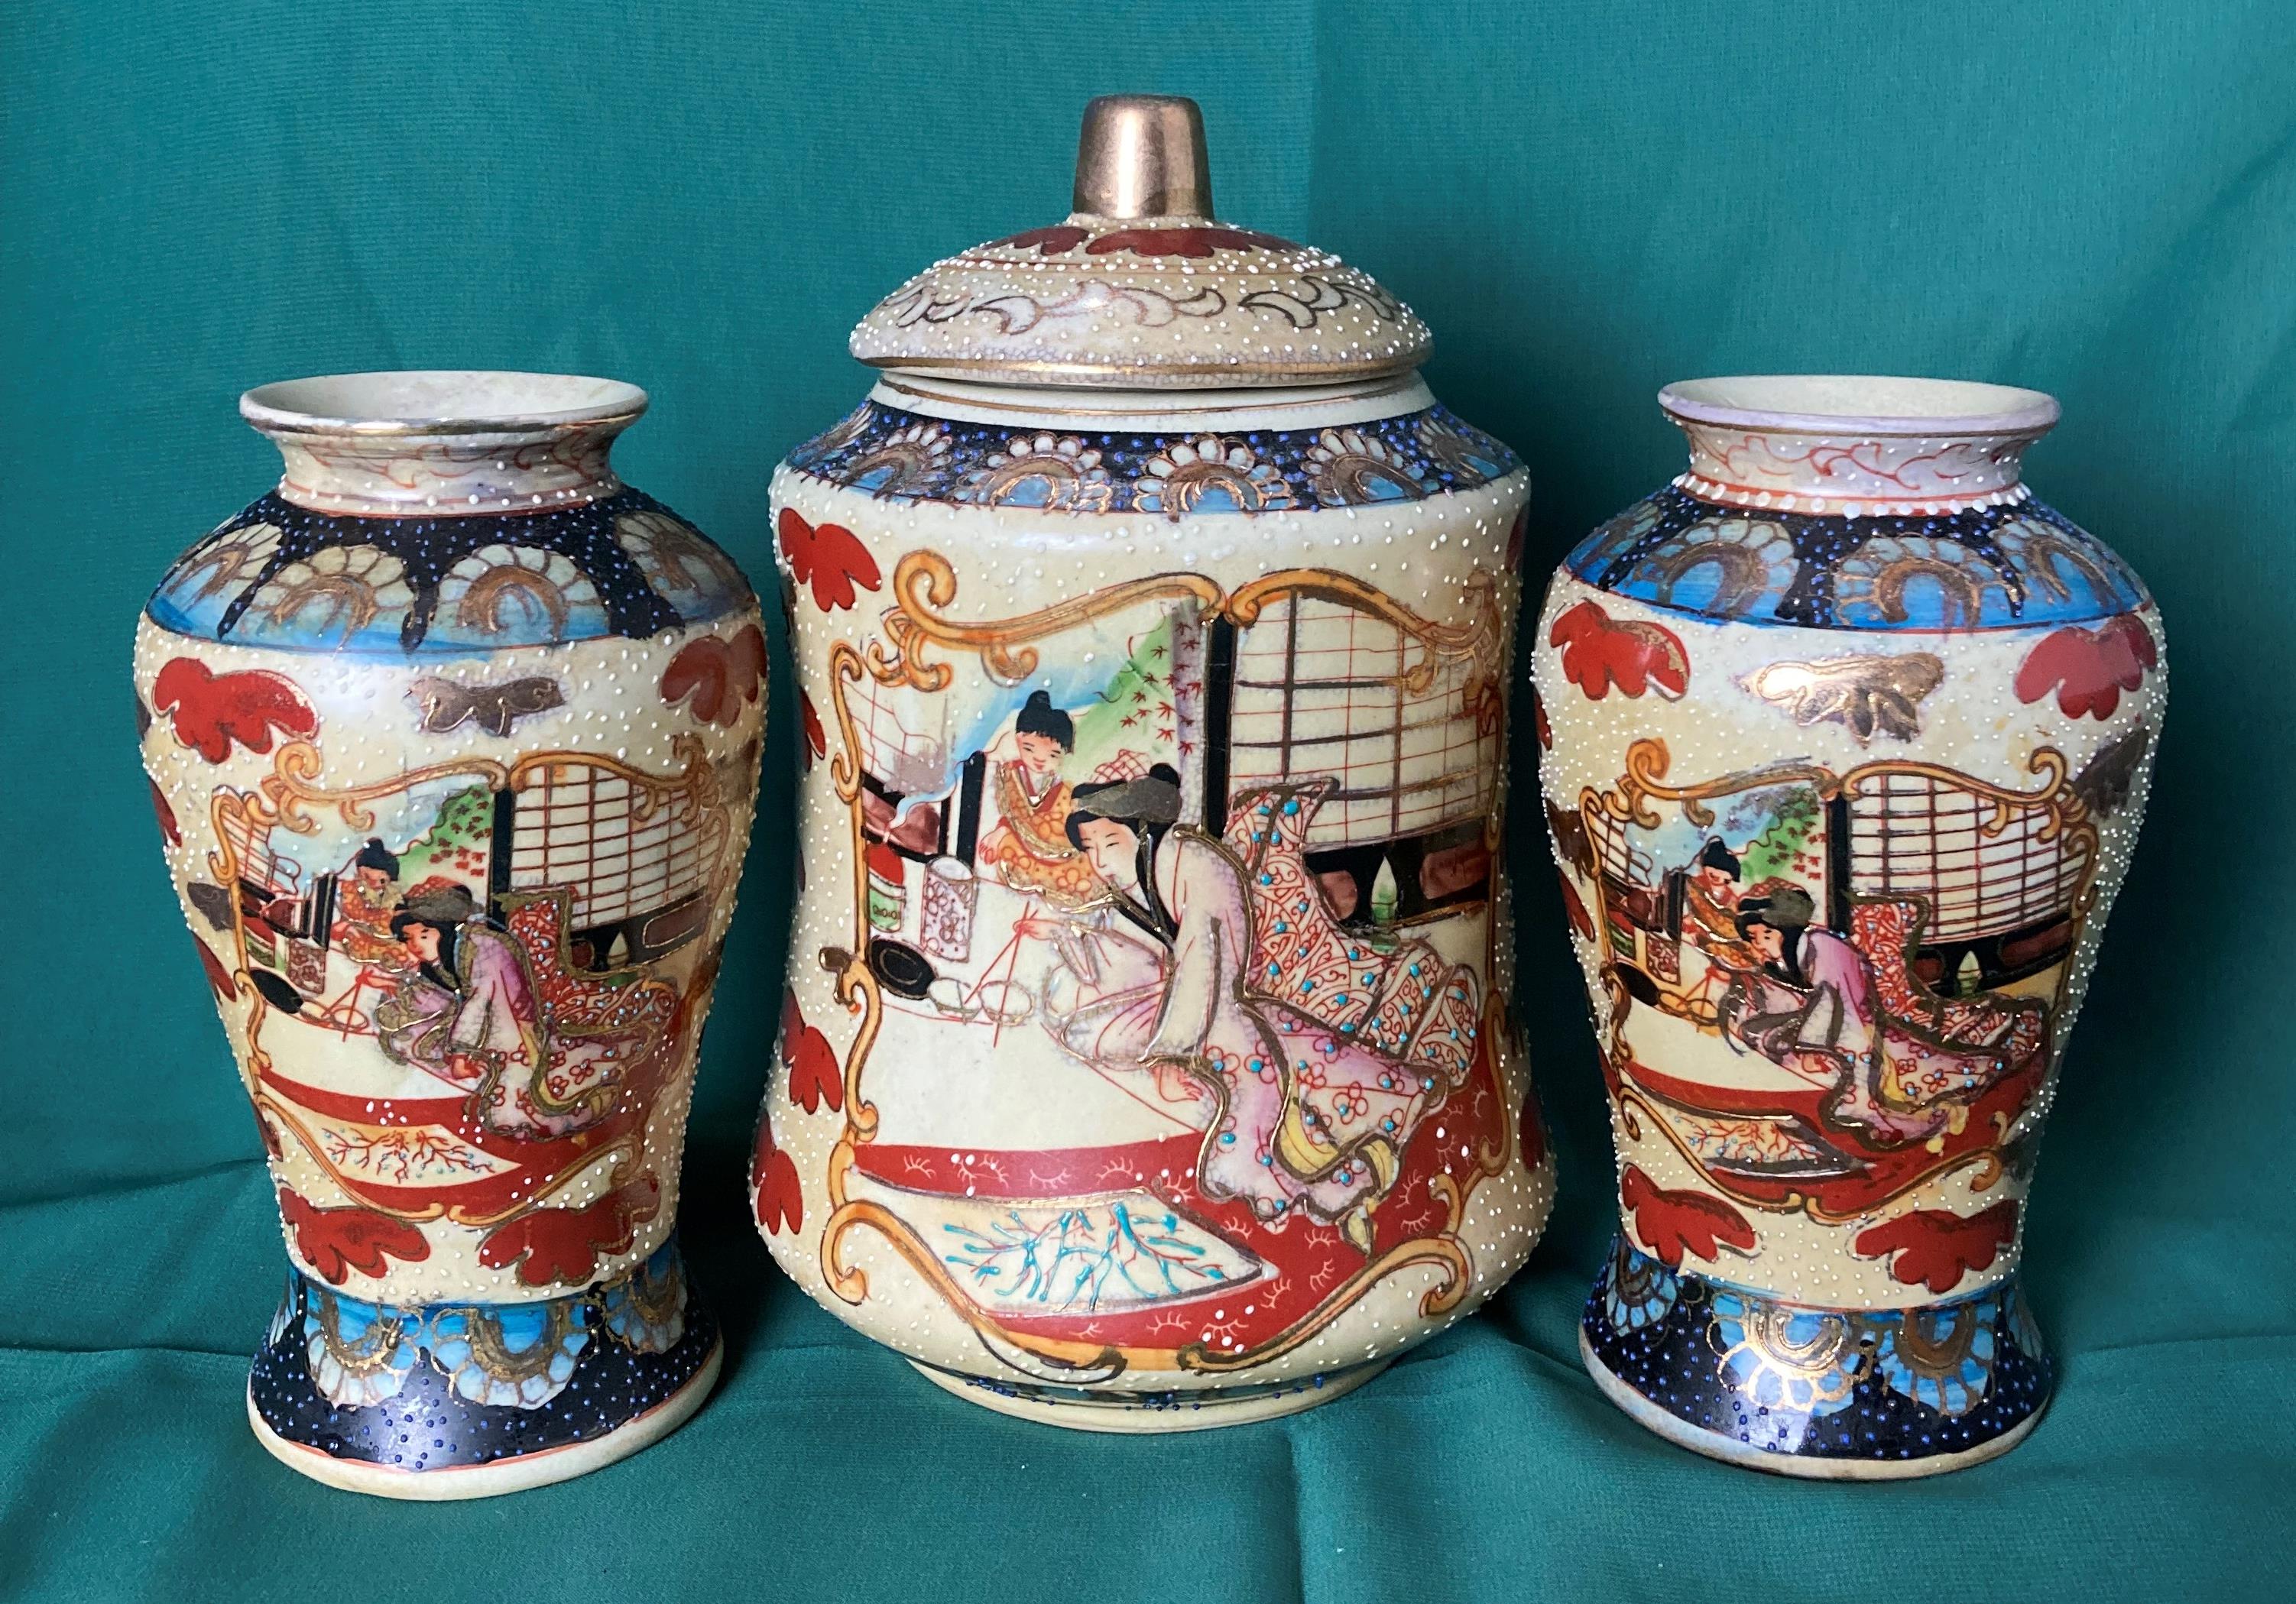 A Japanese Satsuma lidded jar with hand-painted Geishas and a matching pair of vases (saleroom